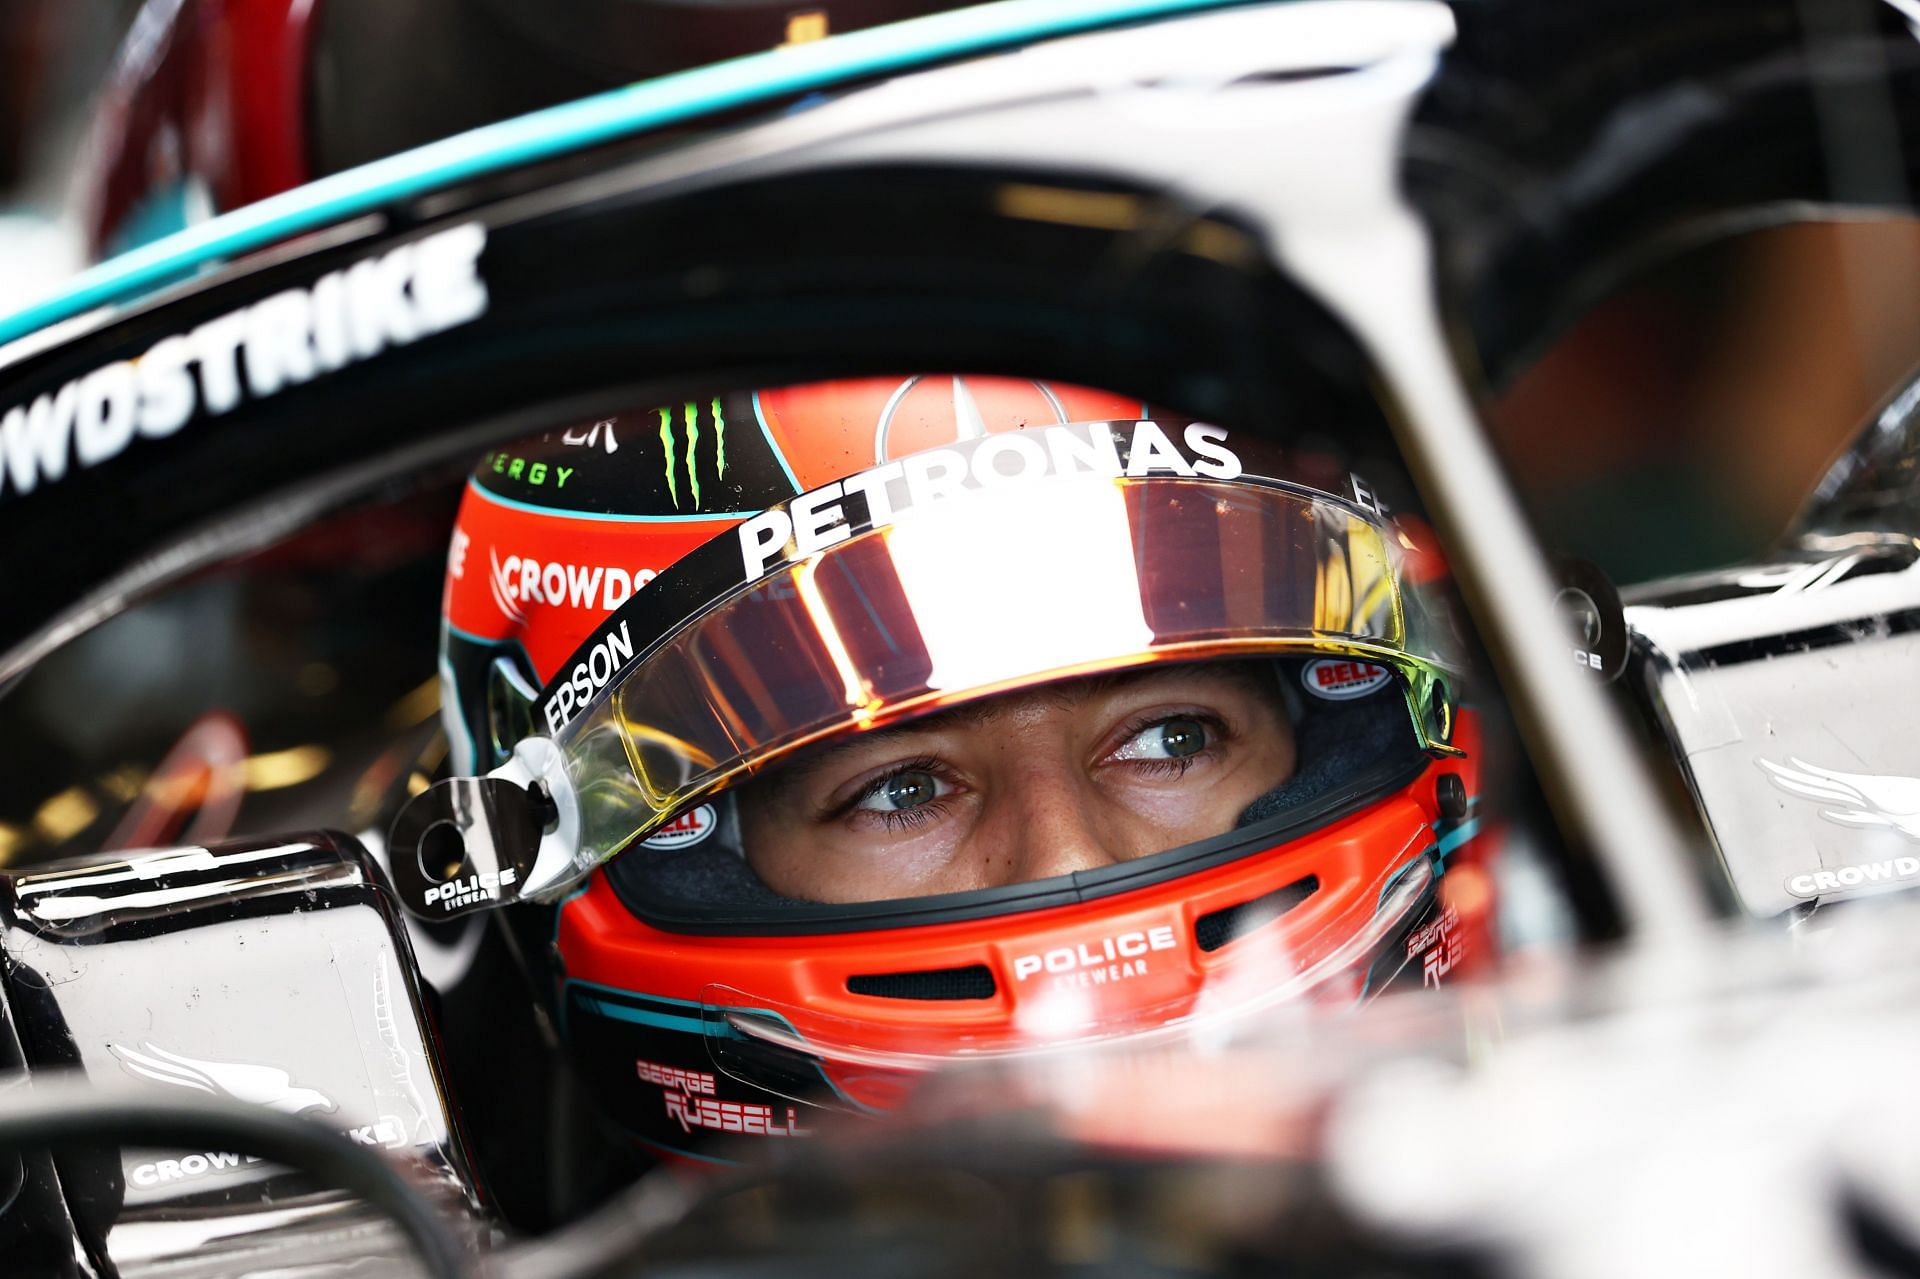 Formula 1 Testing in Abu Dhabi - George Russell prepares with his new team